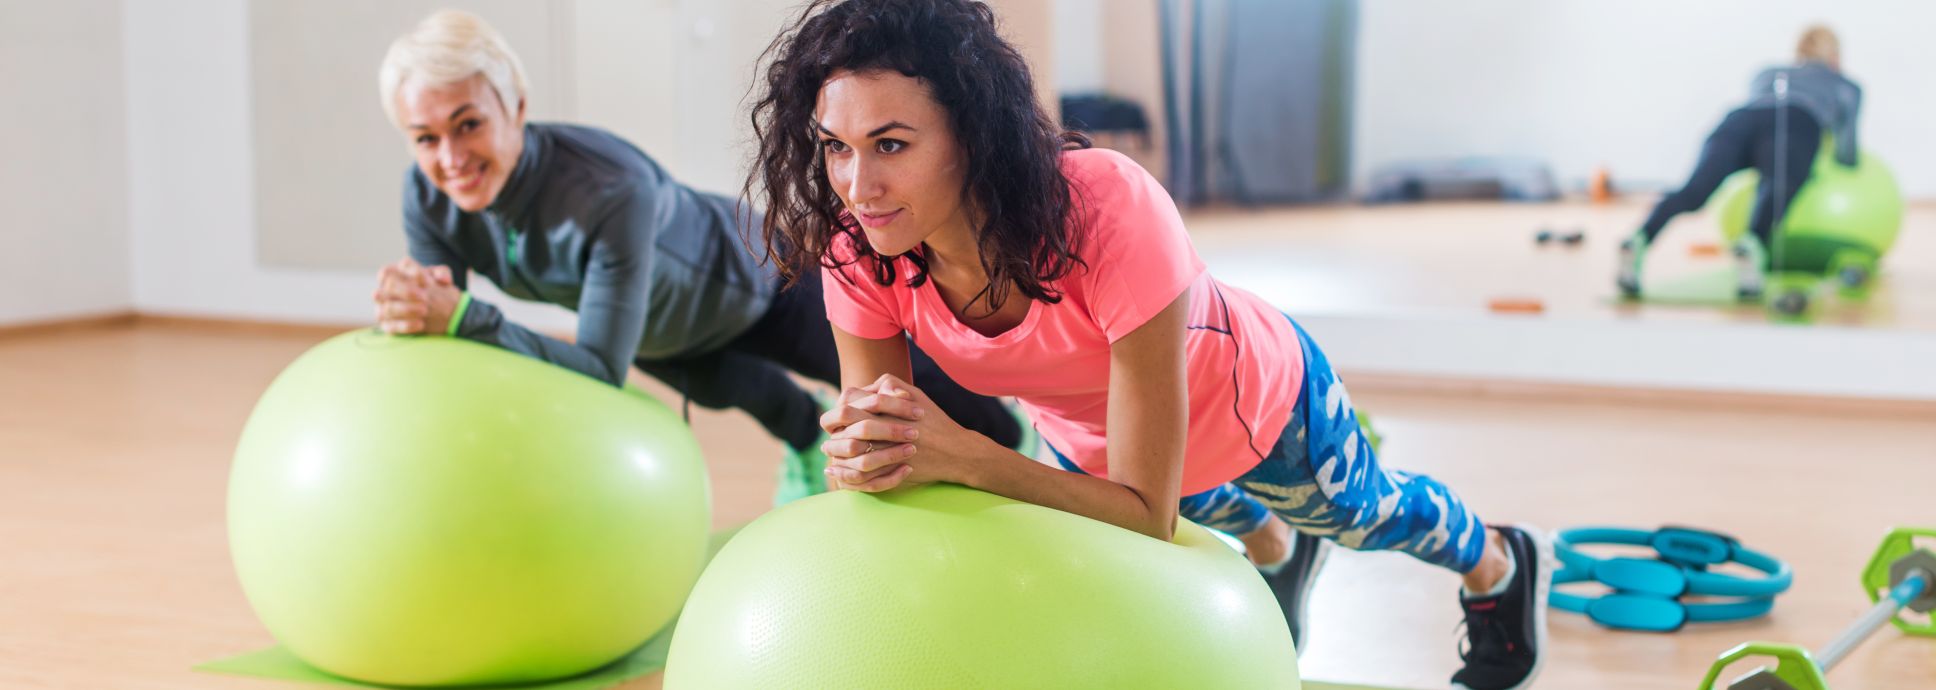 2 women working out with exercise balls